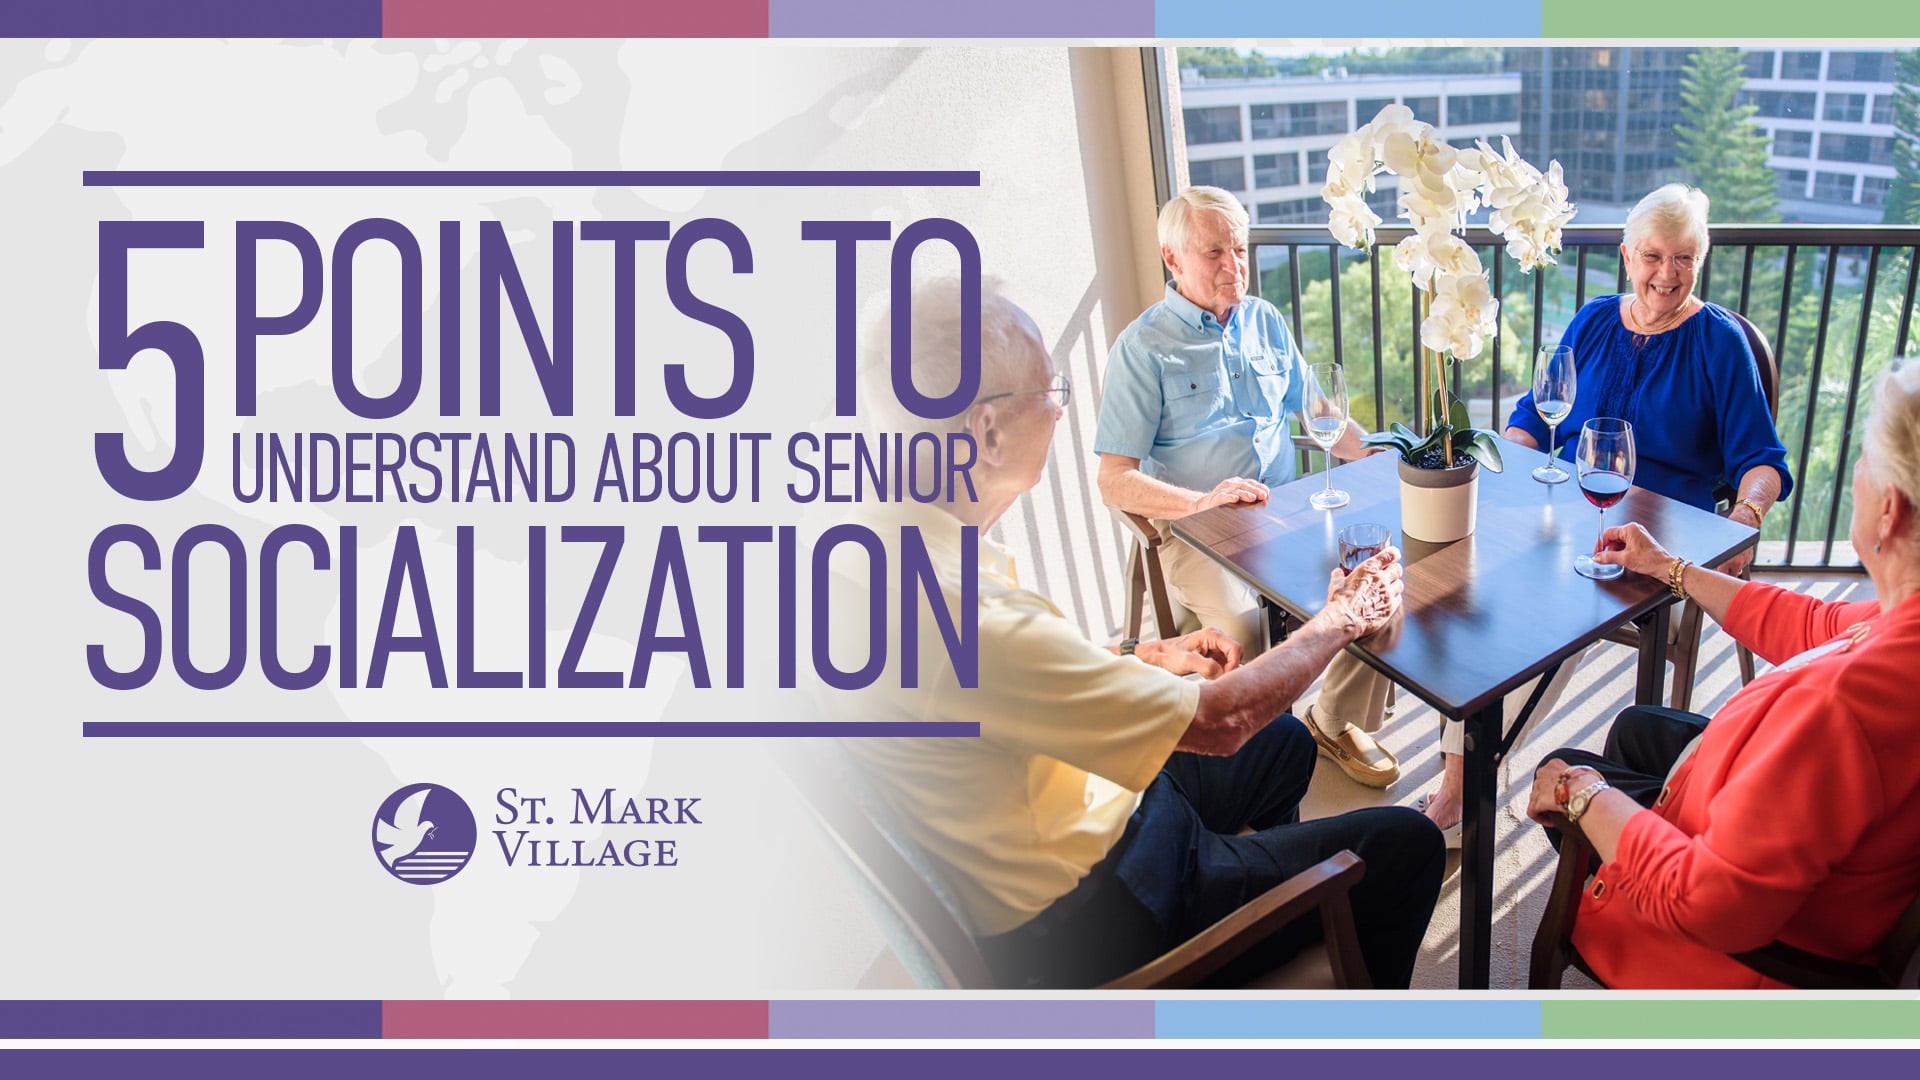 5 points to understand about senior socialization.